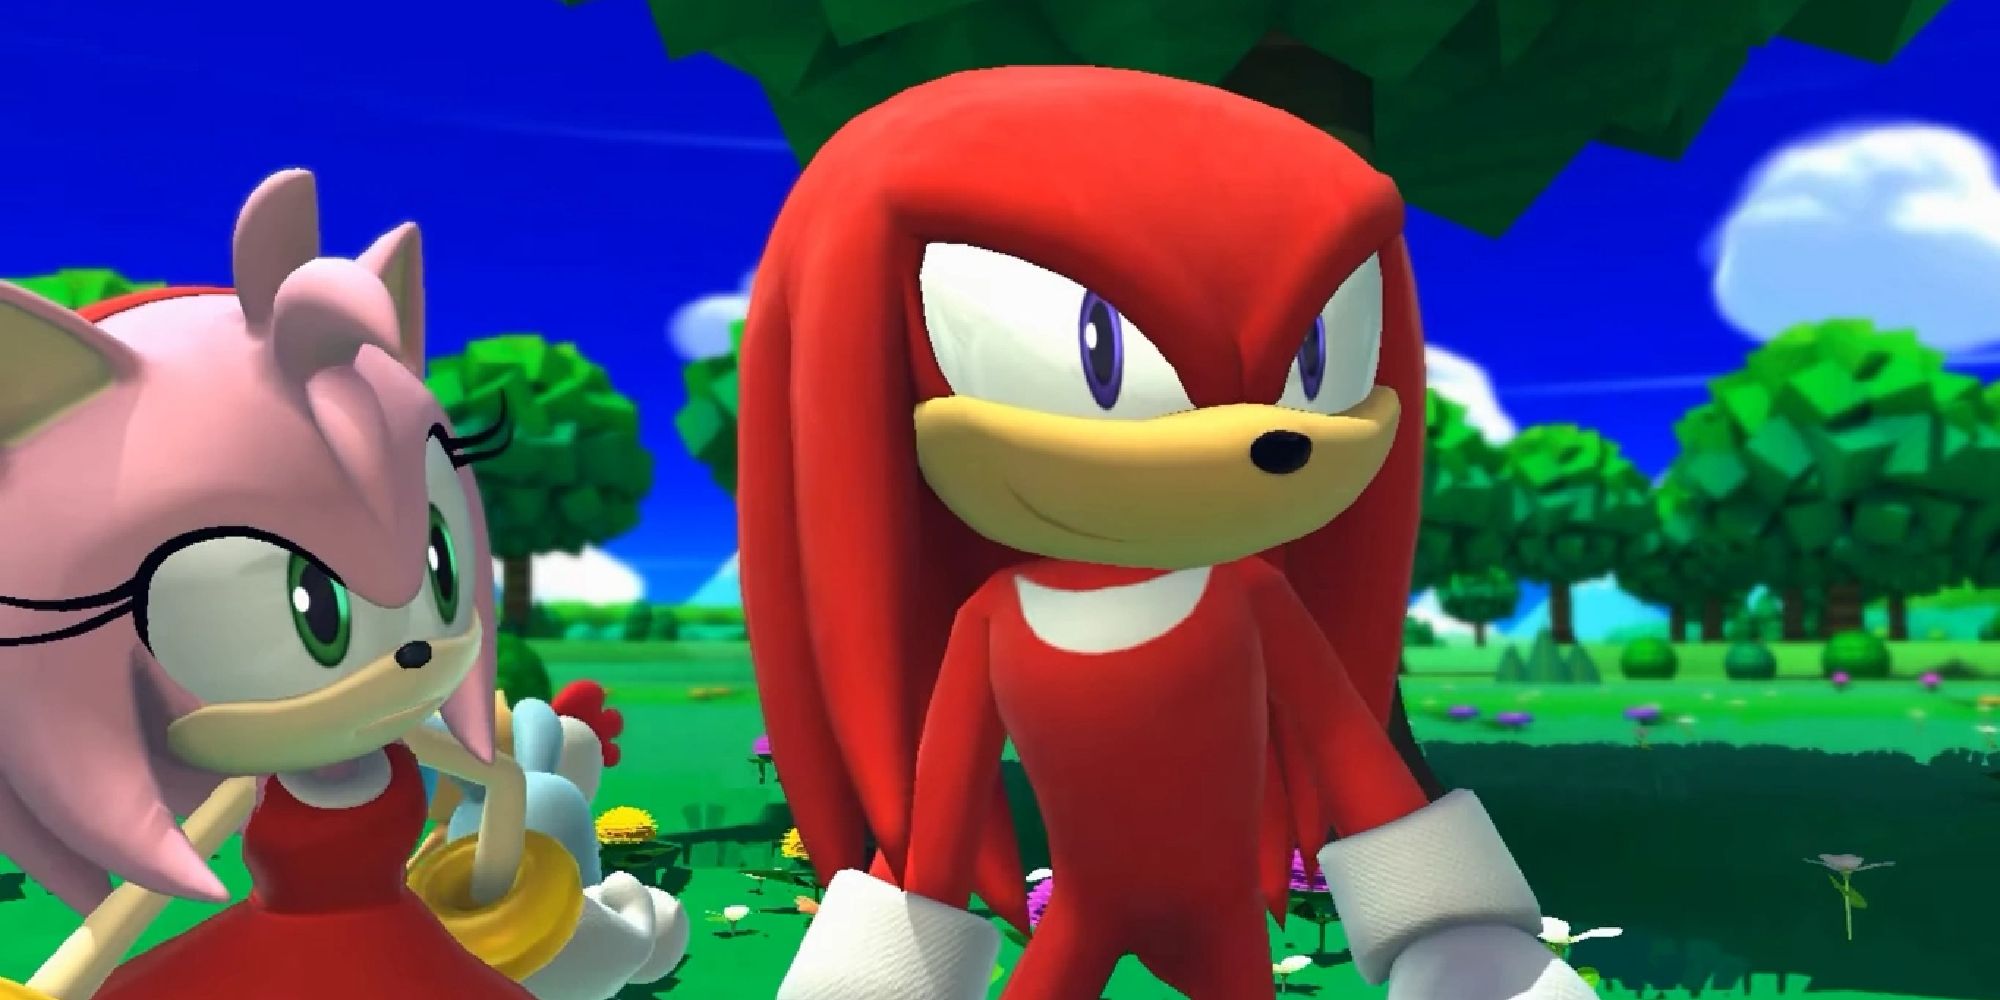 Knuckles standing with Amy in a cutscene from Sonic Lost World